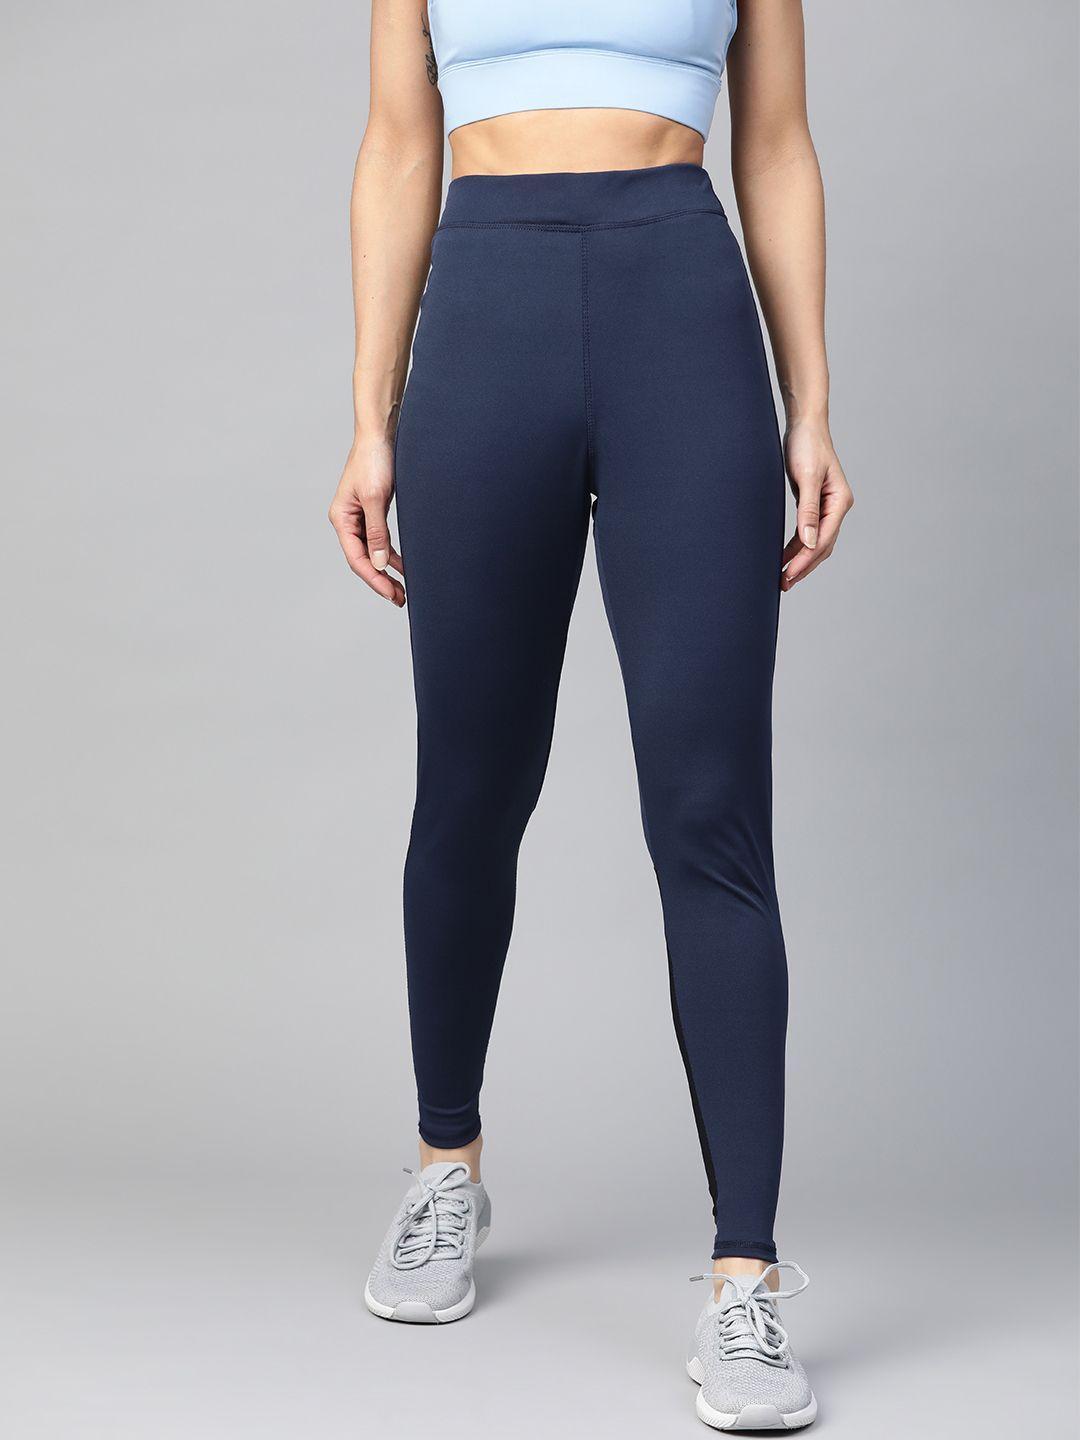 m7 by metronaut women navy blue & black high-rise solid training tights